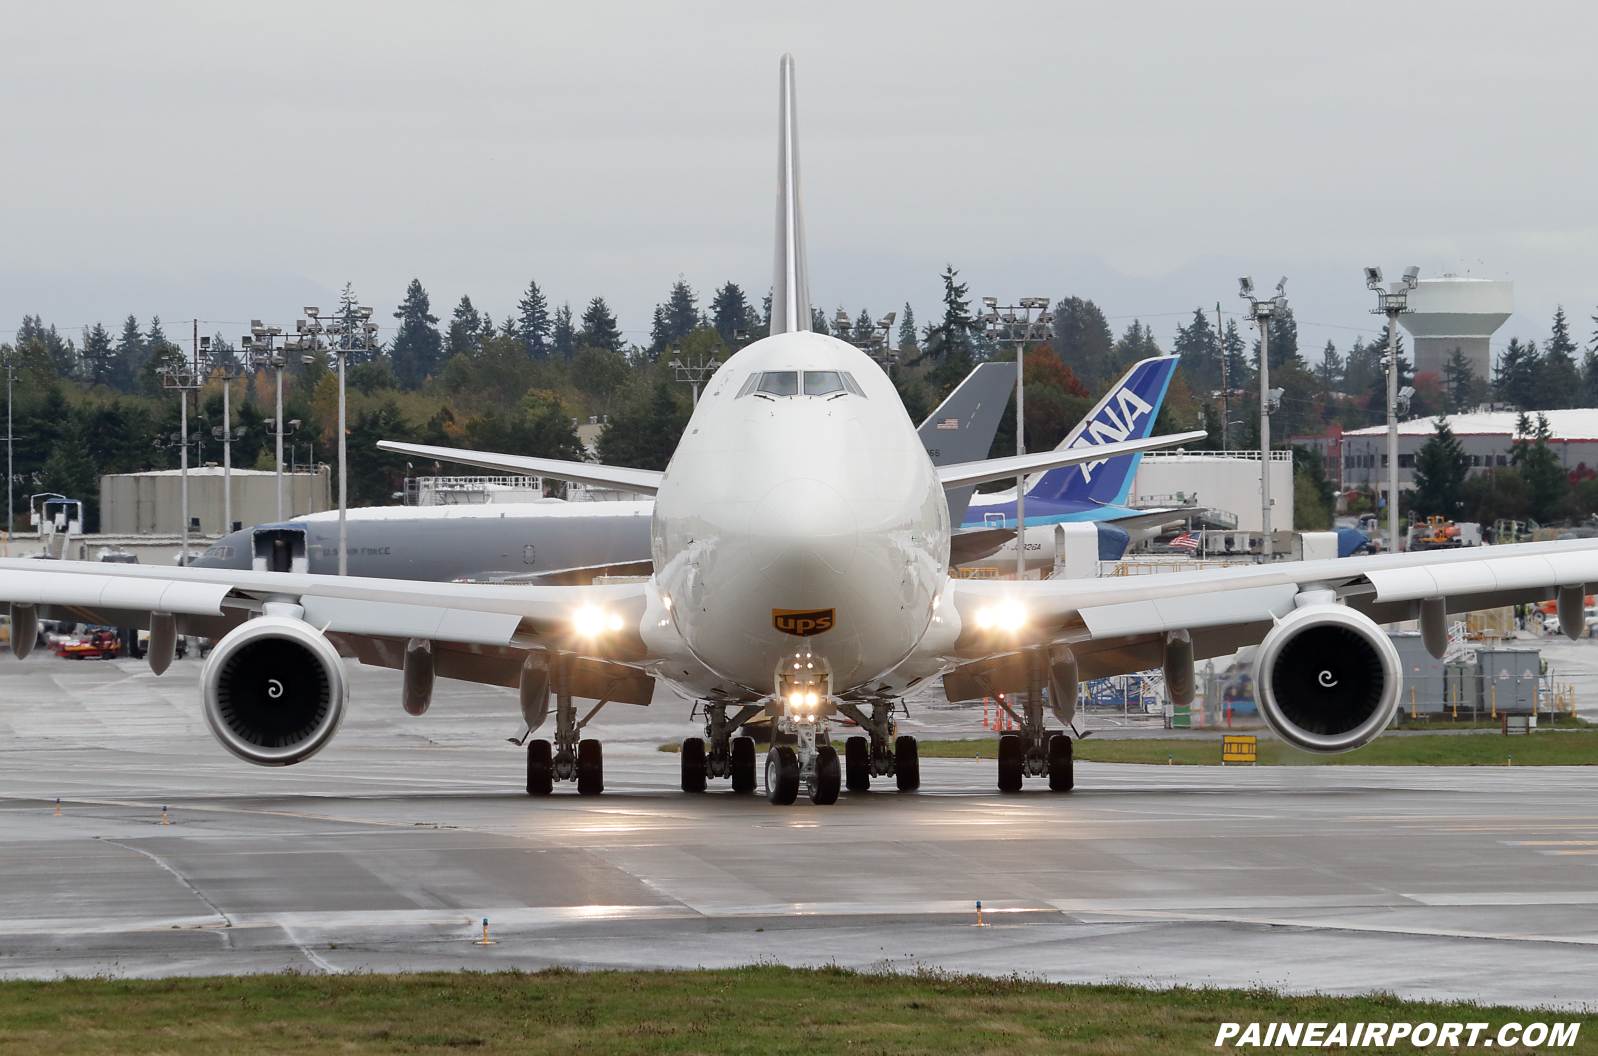 UPS 747-8F N630UP at KPAE Paine Field